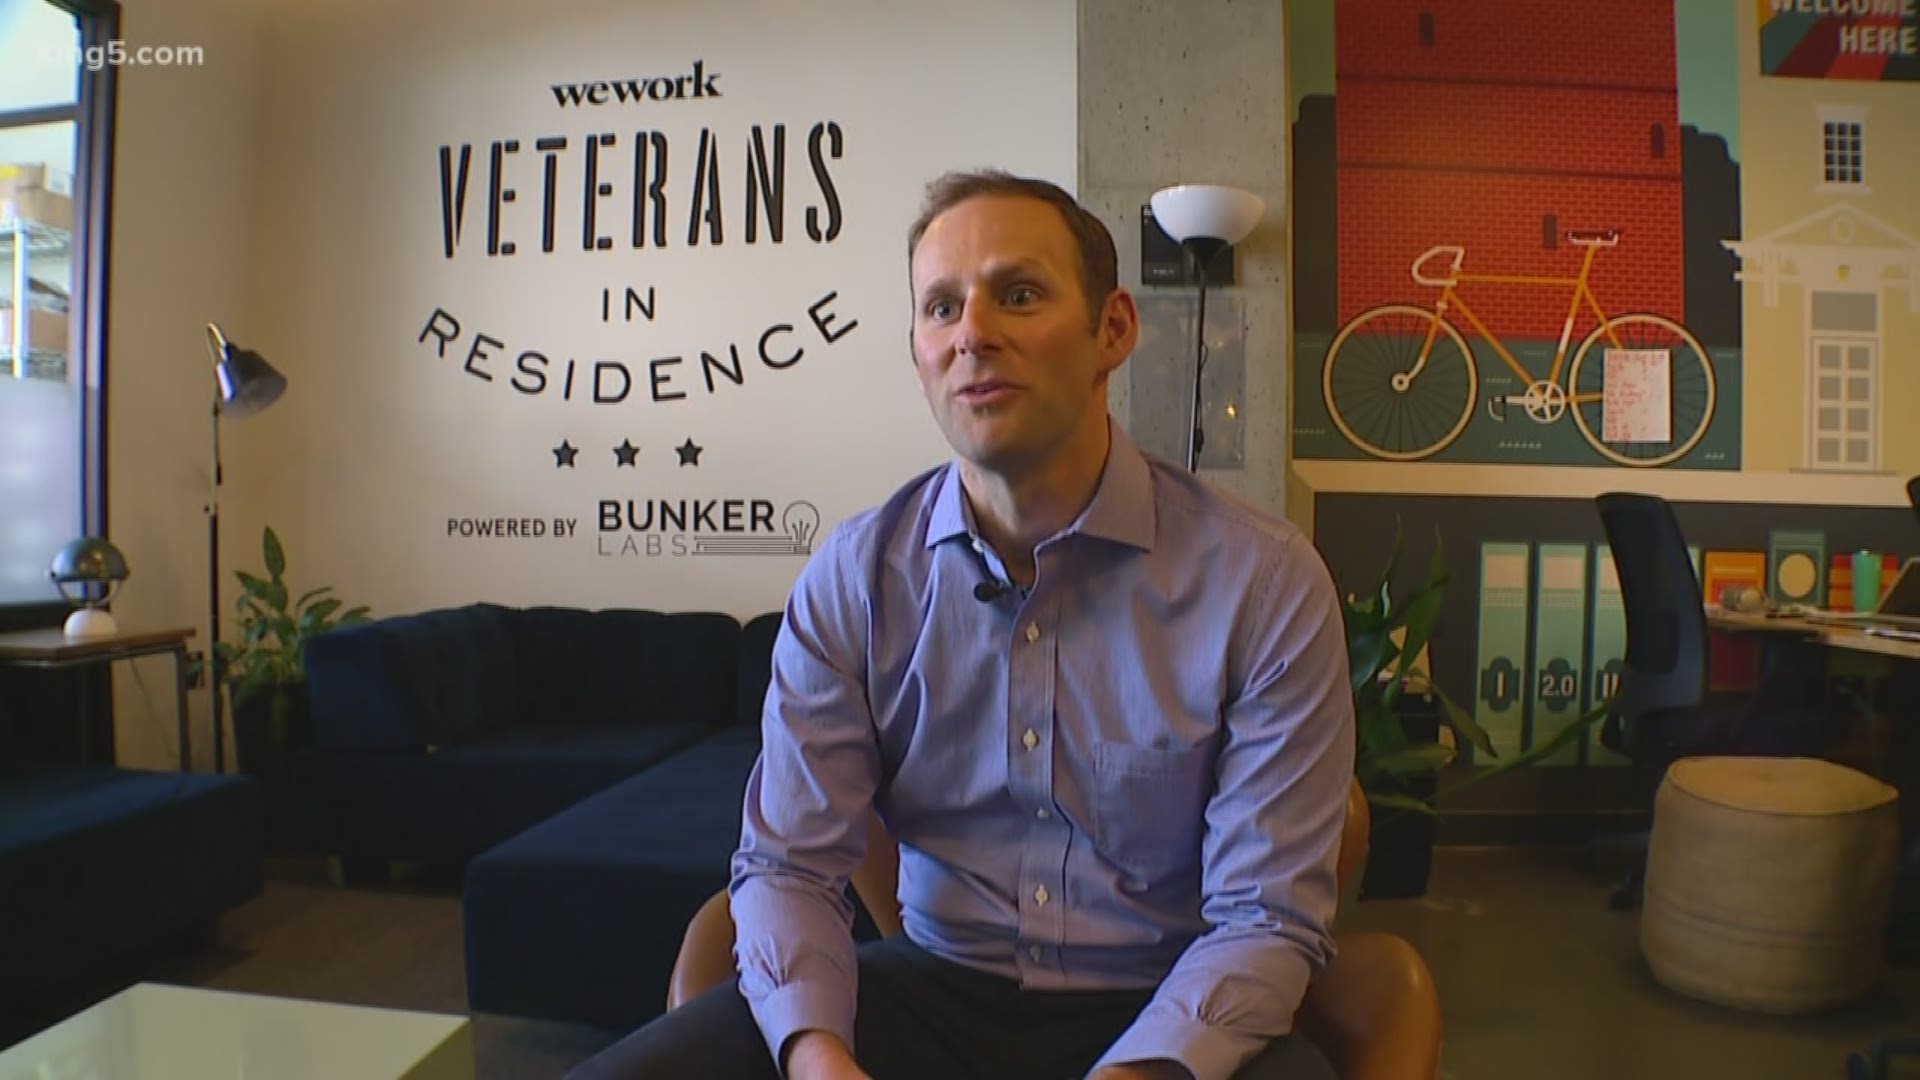 When they leave the military, many veterans try to start their own businesses. It's a big change, transitioning from active duty, to entrepreneur. A non-profit is helping them take-off, and there are some interesting startups right in our own backyard.
KING 5's Ted Land has the story.